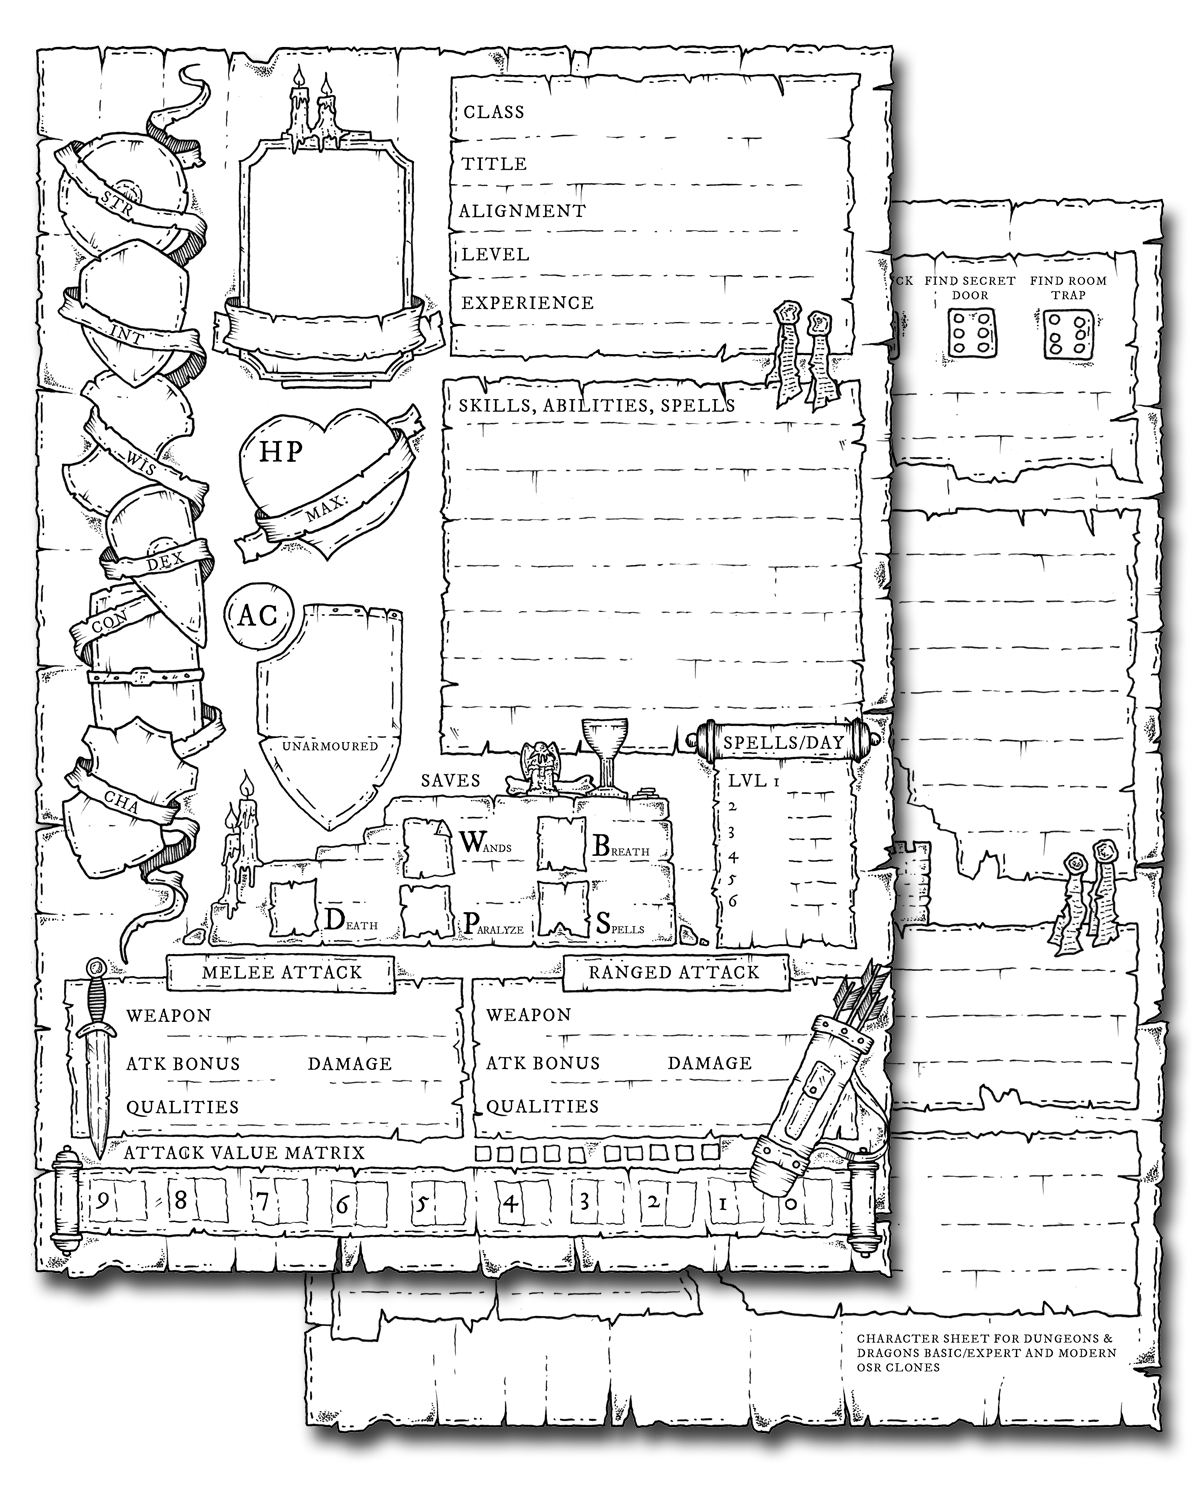 Hand-drawn character sheet for Dungeons & Dragons